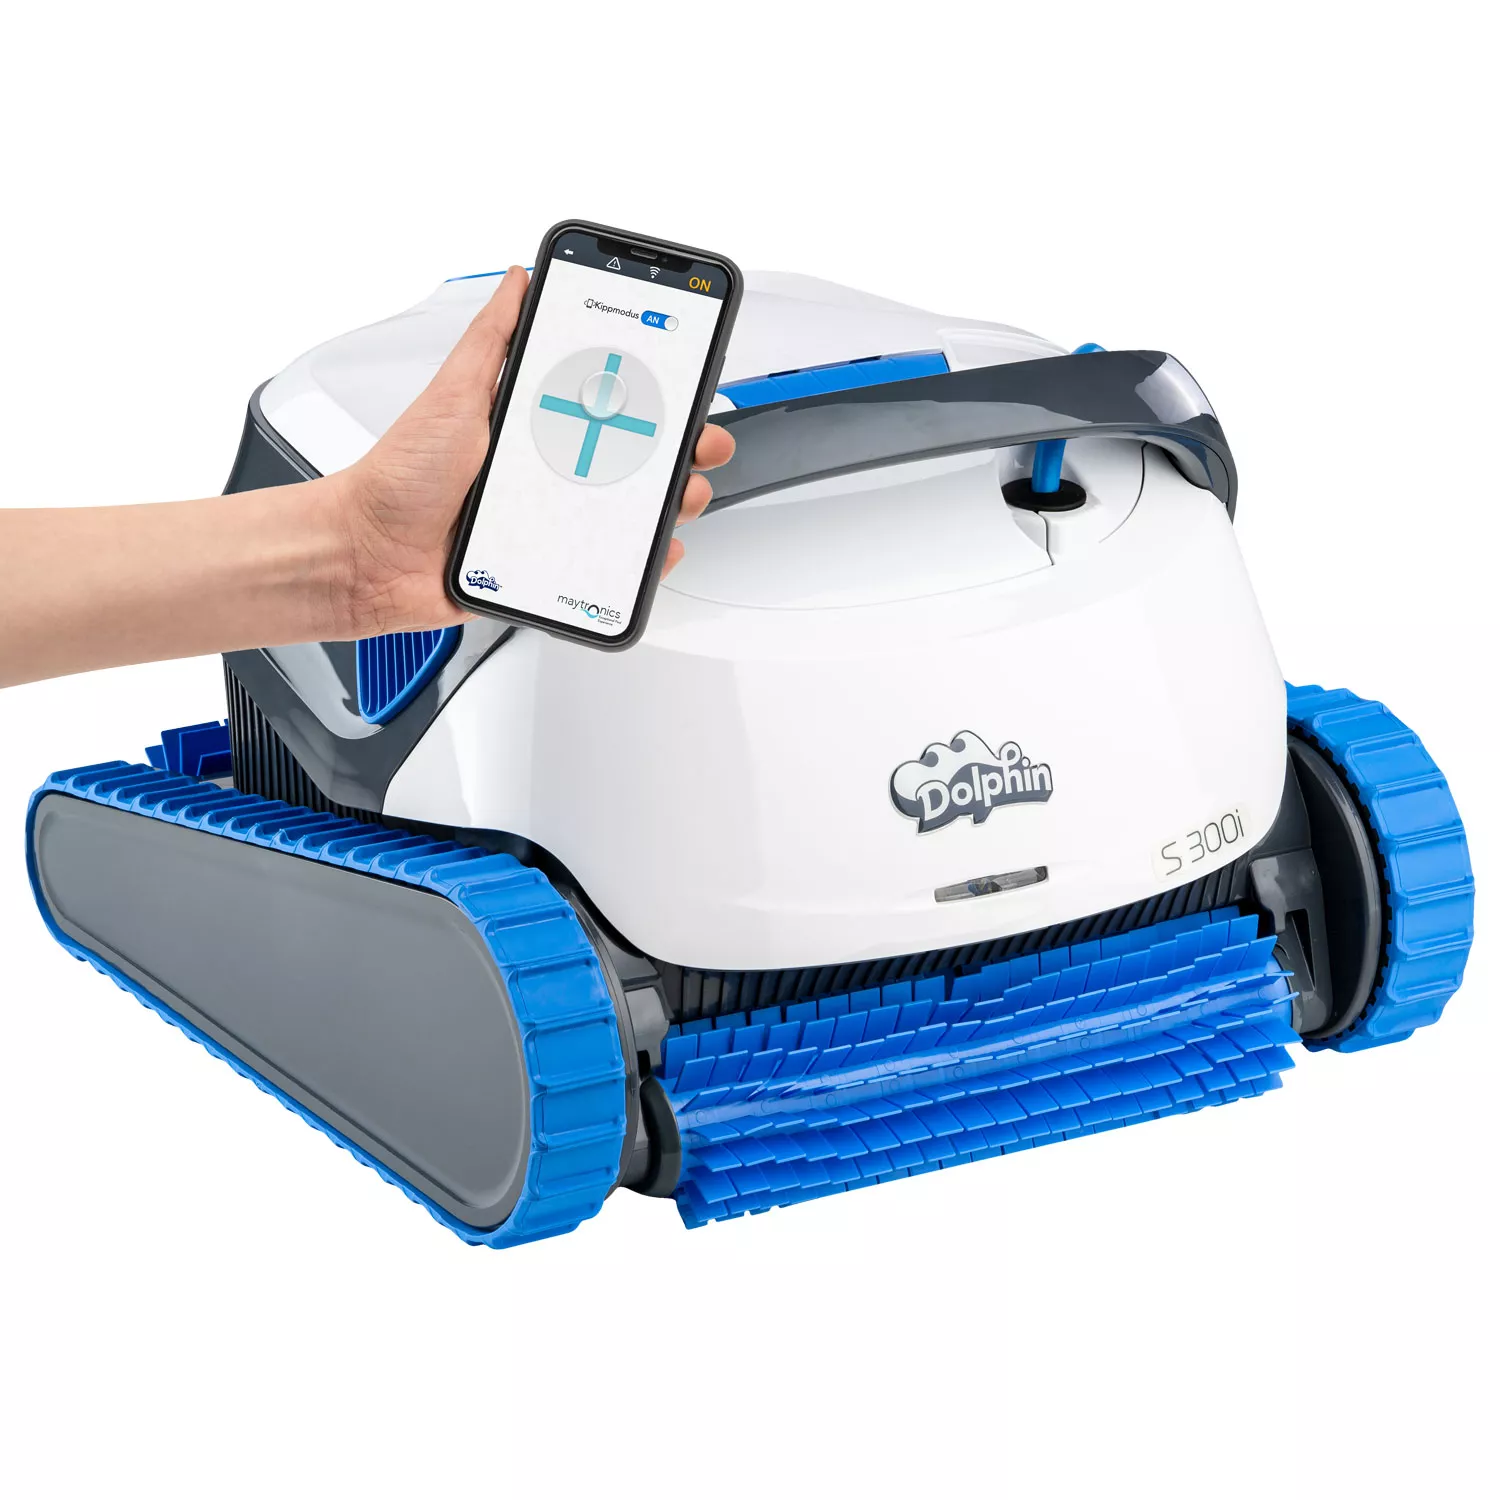 Poolroboter Dolphin S300i